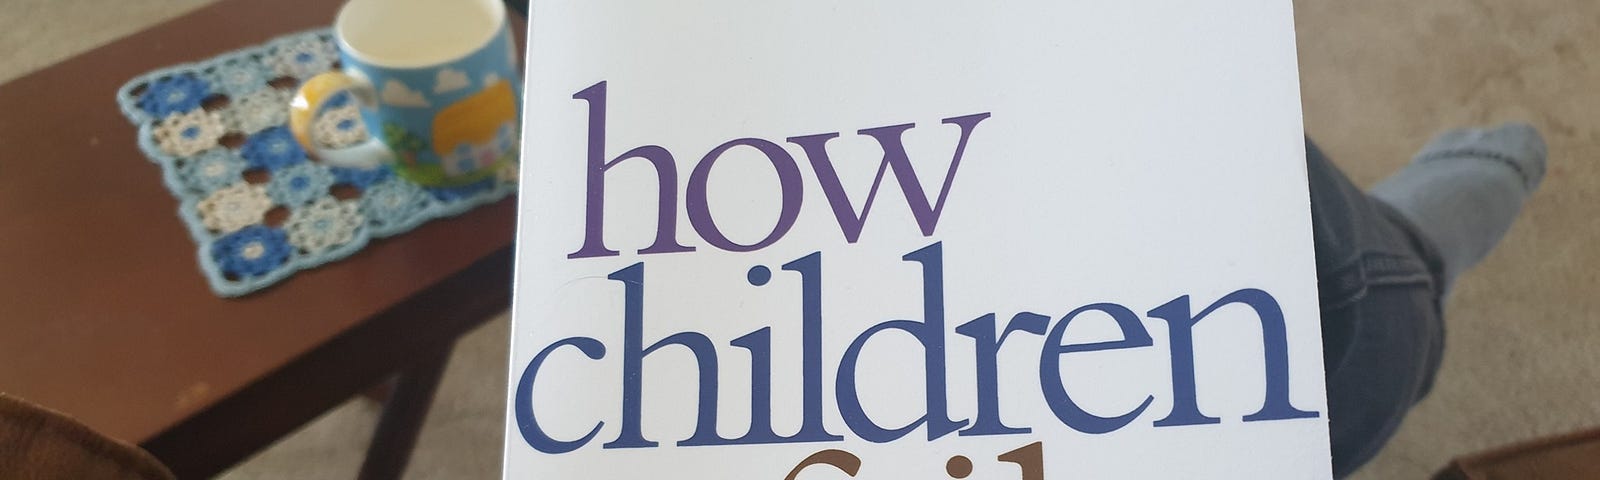 photo of the cover of the book “How Children Fail” by John Holt published in 1964, revised in 1982